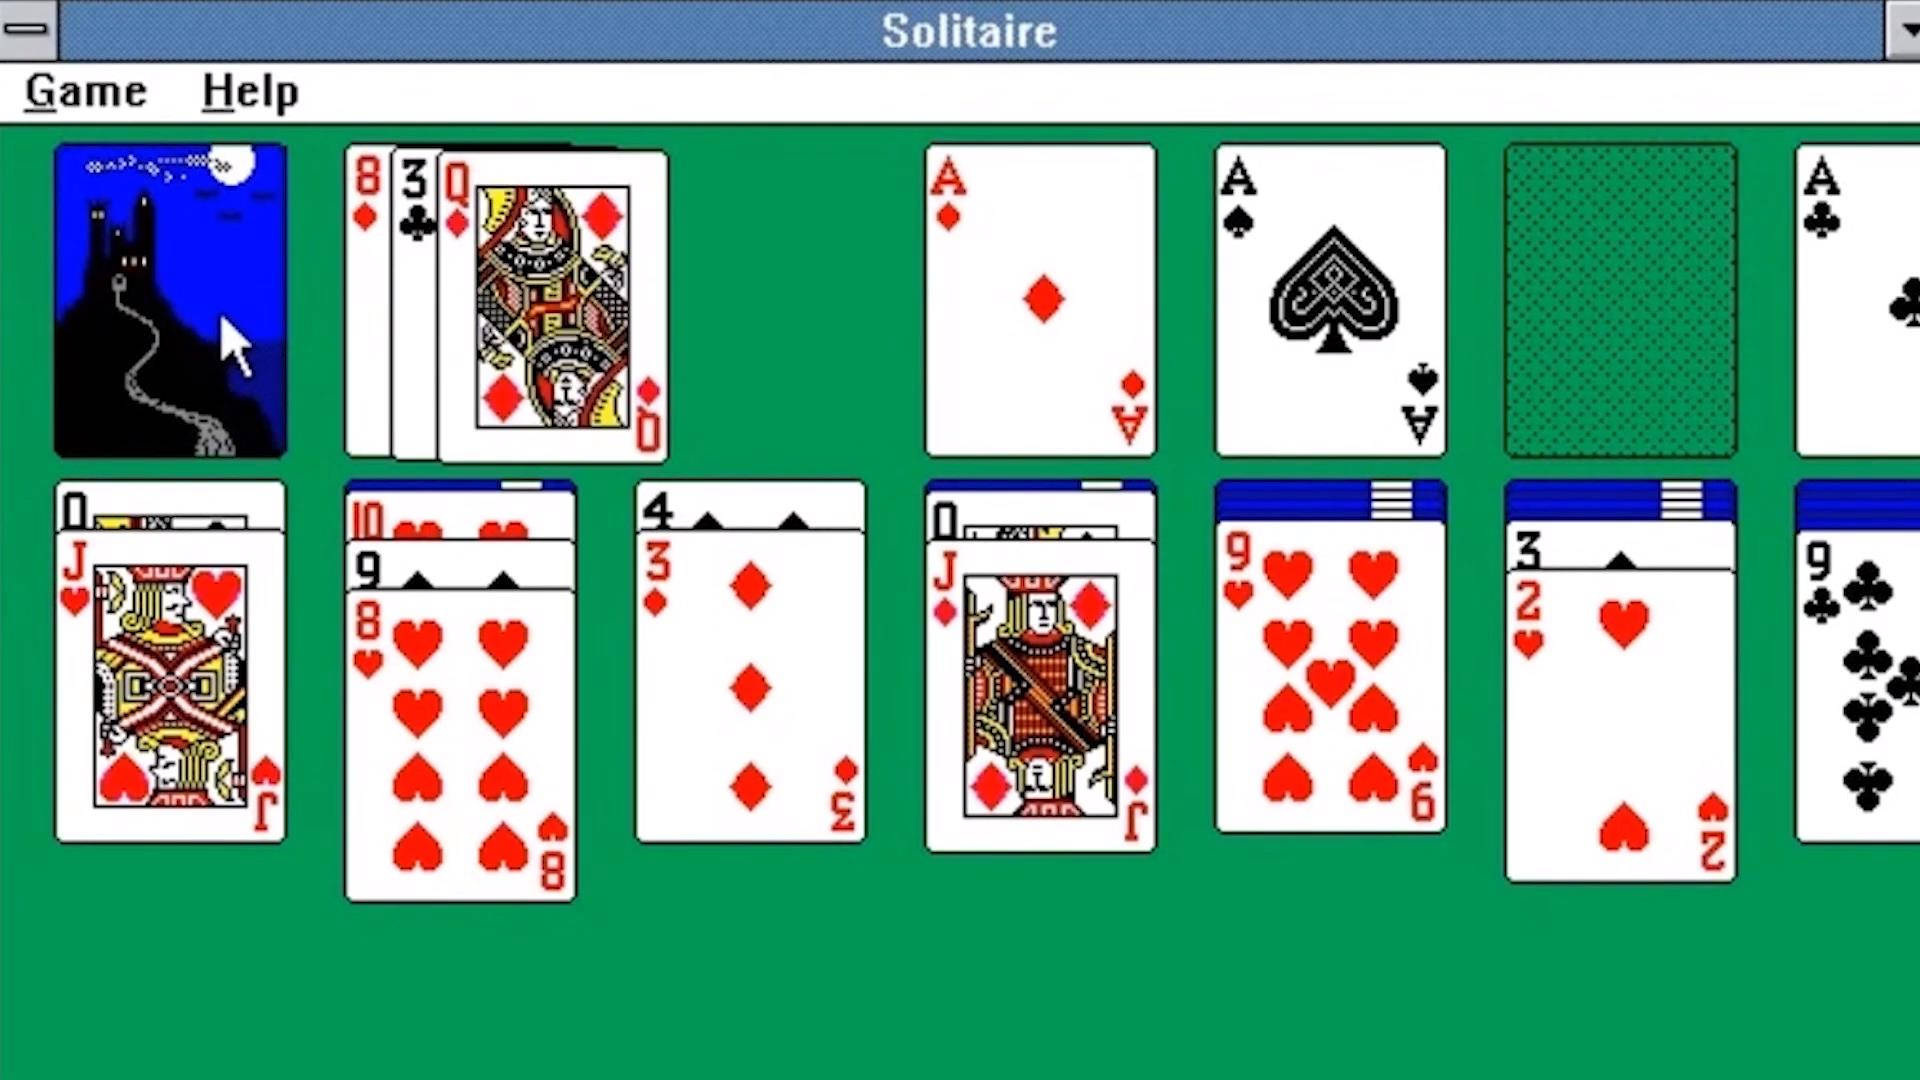 Microsoft Solitaire Game Play Cards Wallpaper